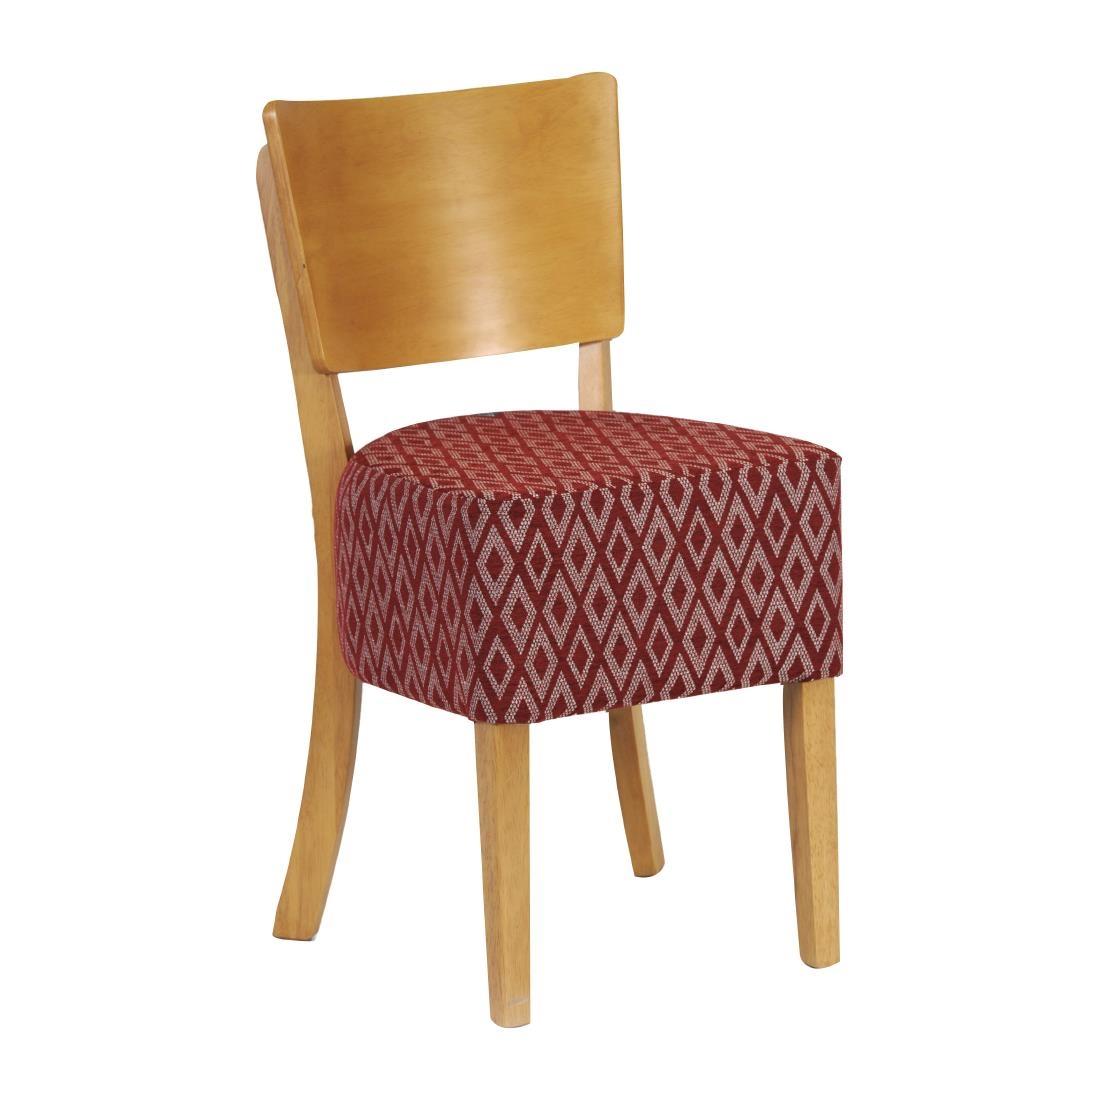 Asti Padded Soft Oak Dining Chair with Red Diamond Deep Padded Seat and Back (Pack of 2) - FT424  - 1